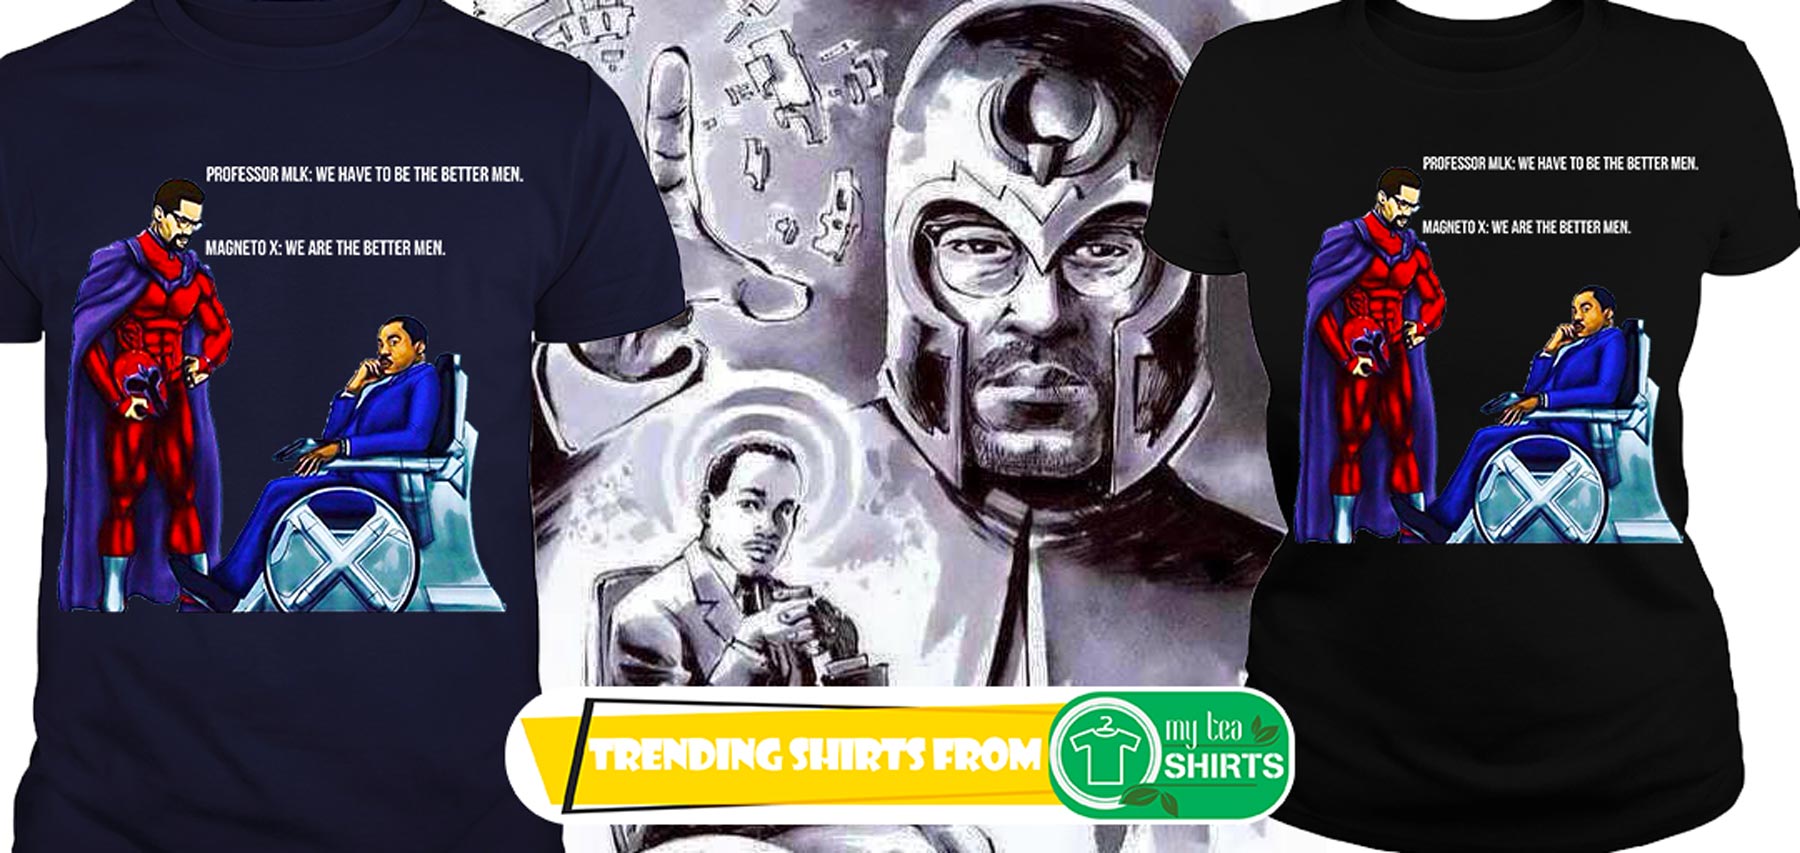 Professor MLK and Magneto X We have to be the better men shirt